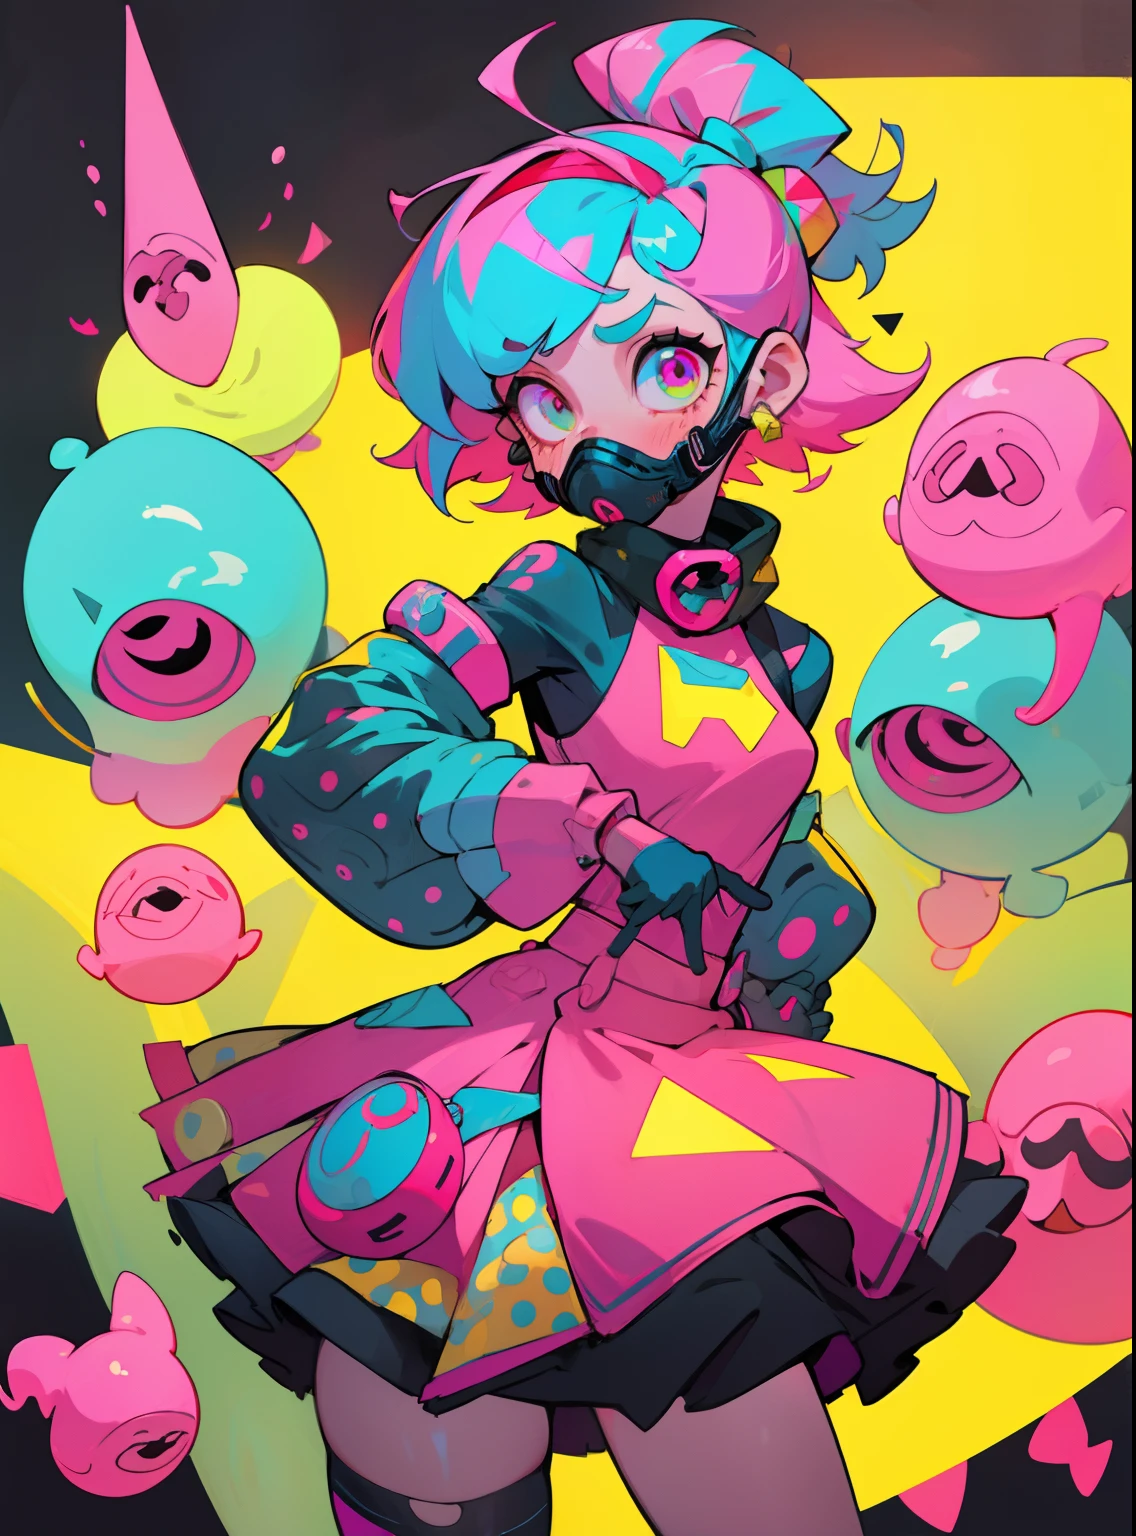 kpop girl with short nice fadecut pink hair, colorful glowing gass mask, lots of shapes attatched everywhere, random shapes mostly triangle, yellow skirt with polcadots, red gloves, and an 2 antena headband